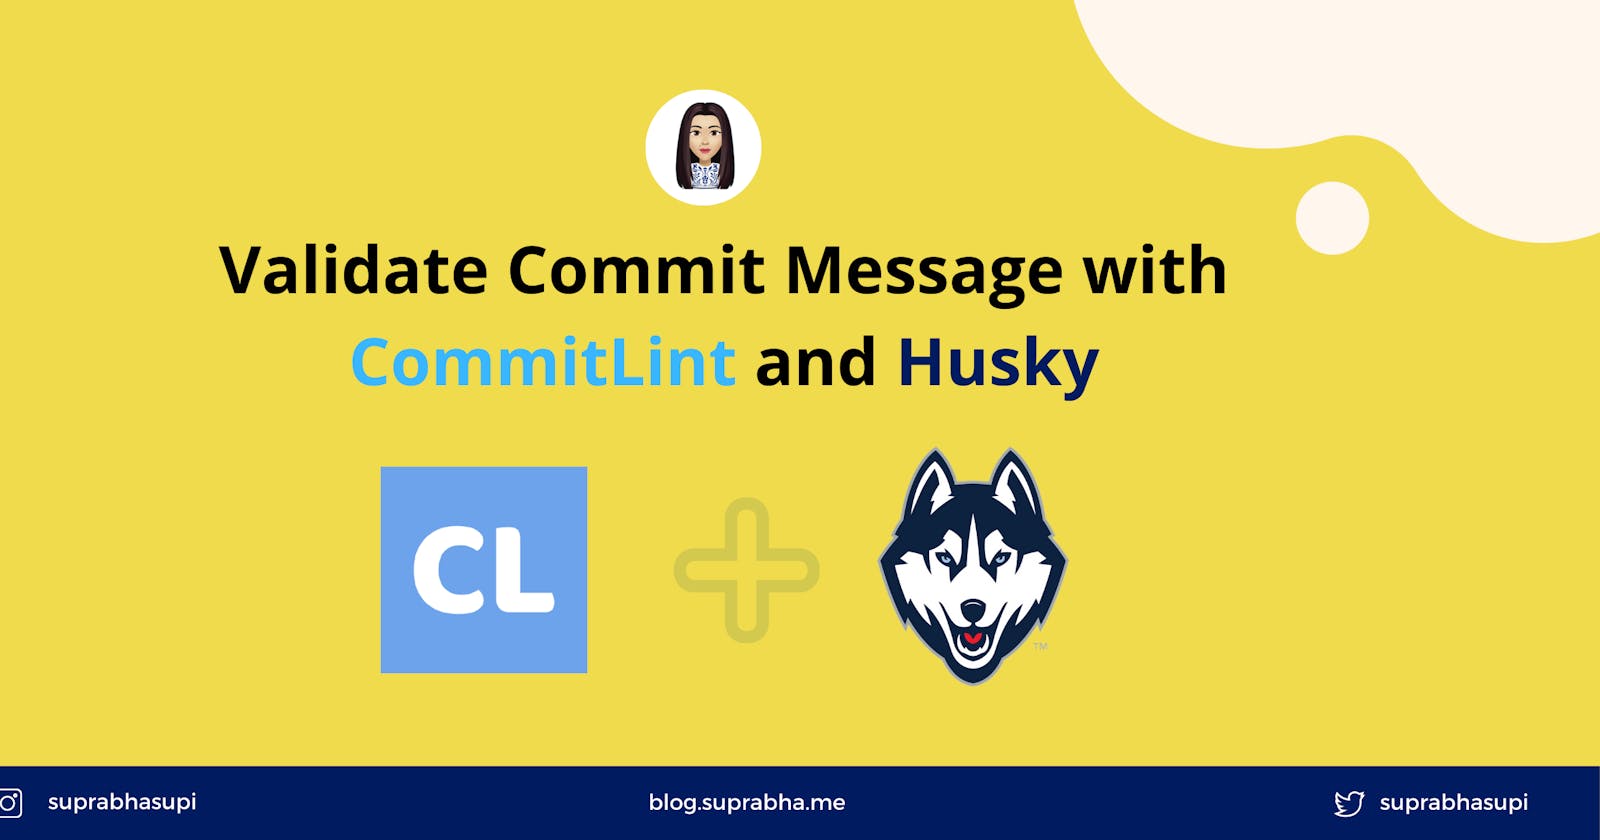 Validate commit message using Commitlint and husky